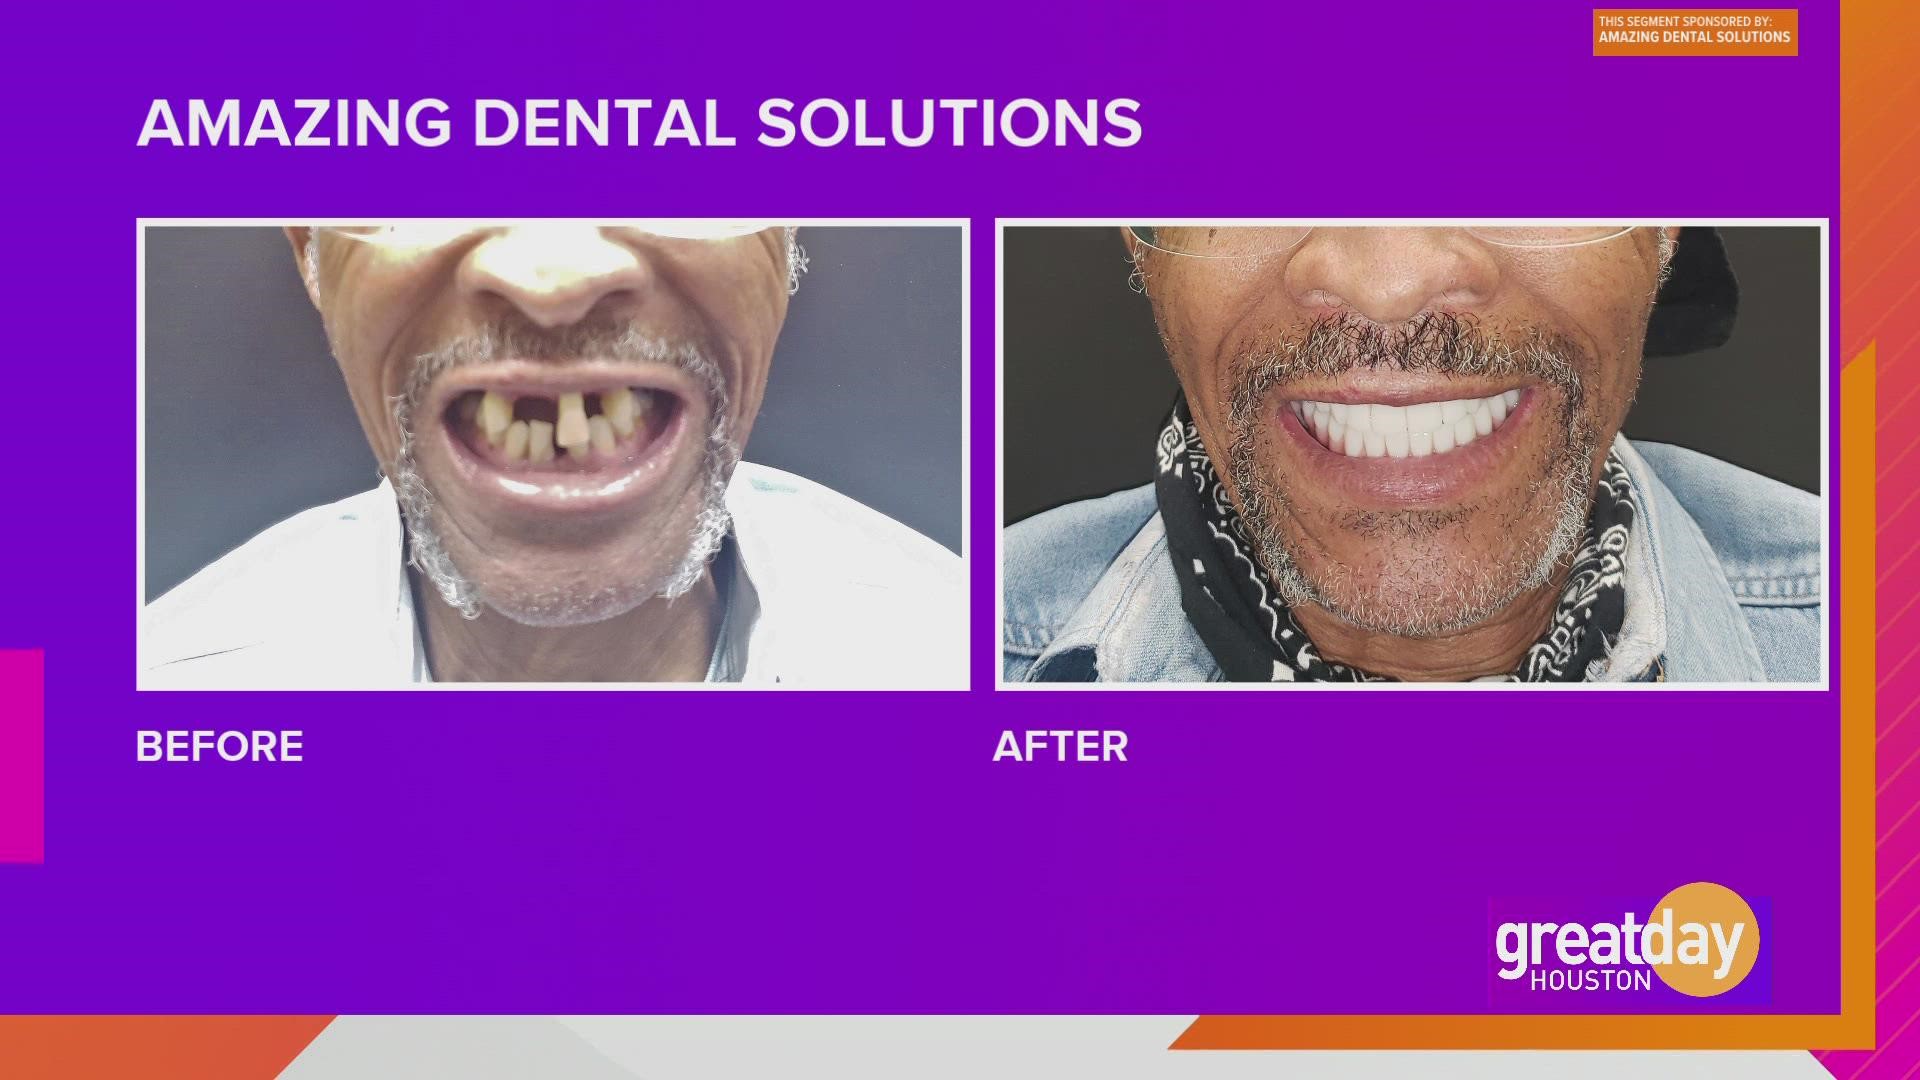 From missing teeth to having the brightest smile in the room, Dr. Amaning, owner of Amazing Dental Solutions, shares how his dental magic works!